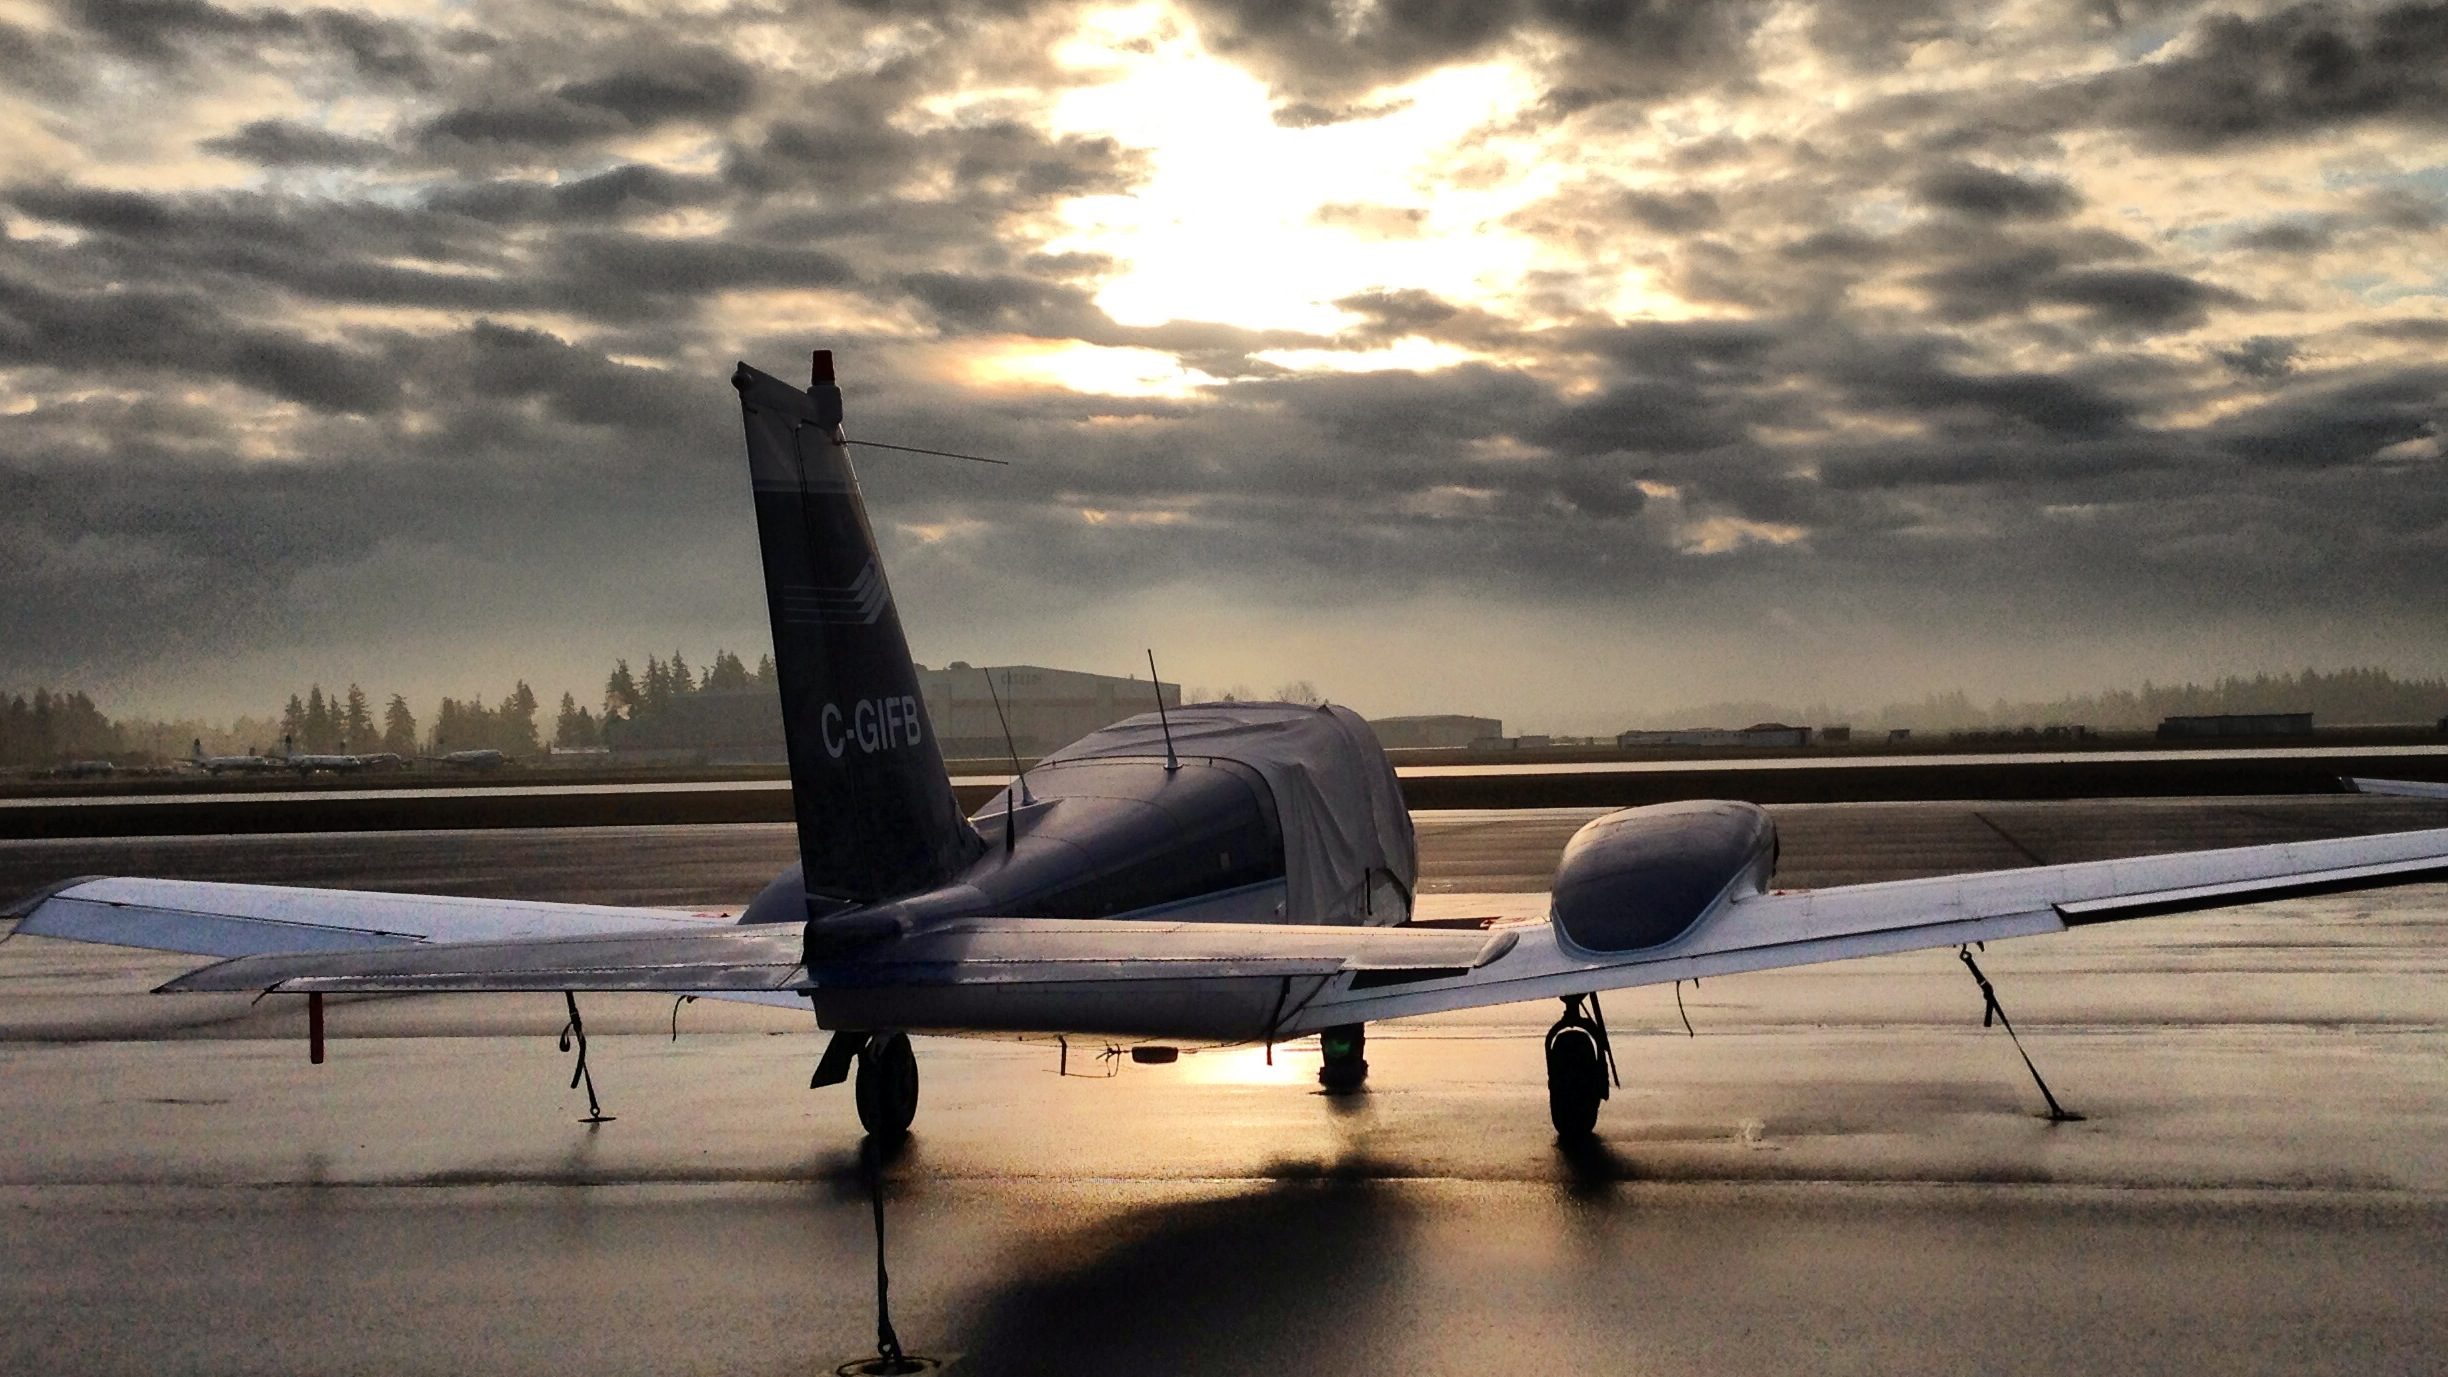 PA-30 Twin Comanche at dawn. What secrets will be revealed today?